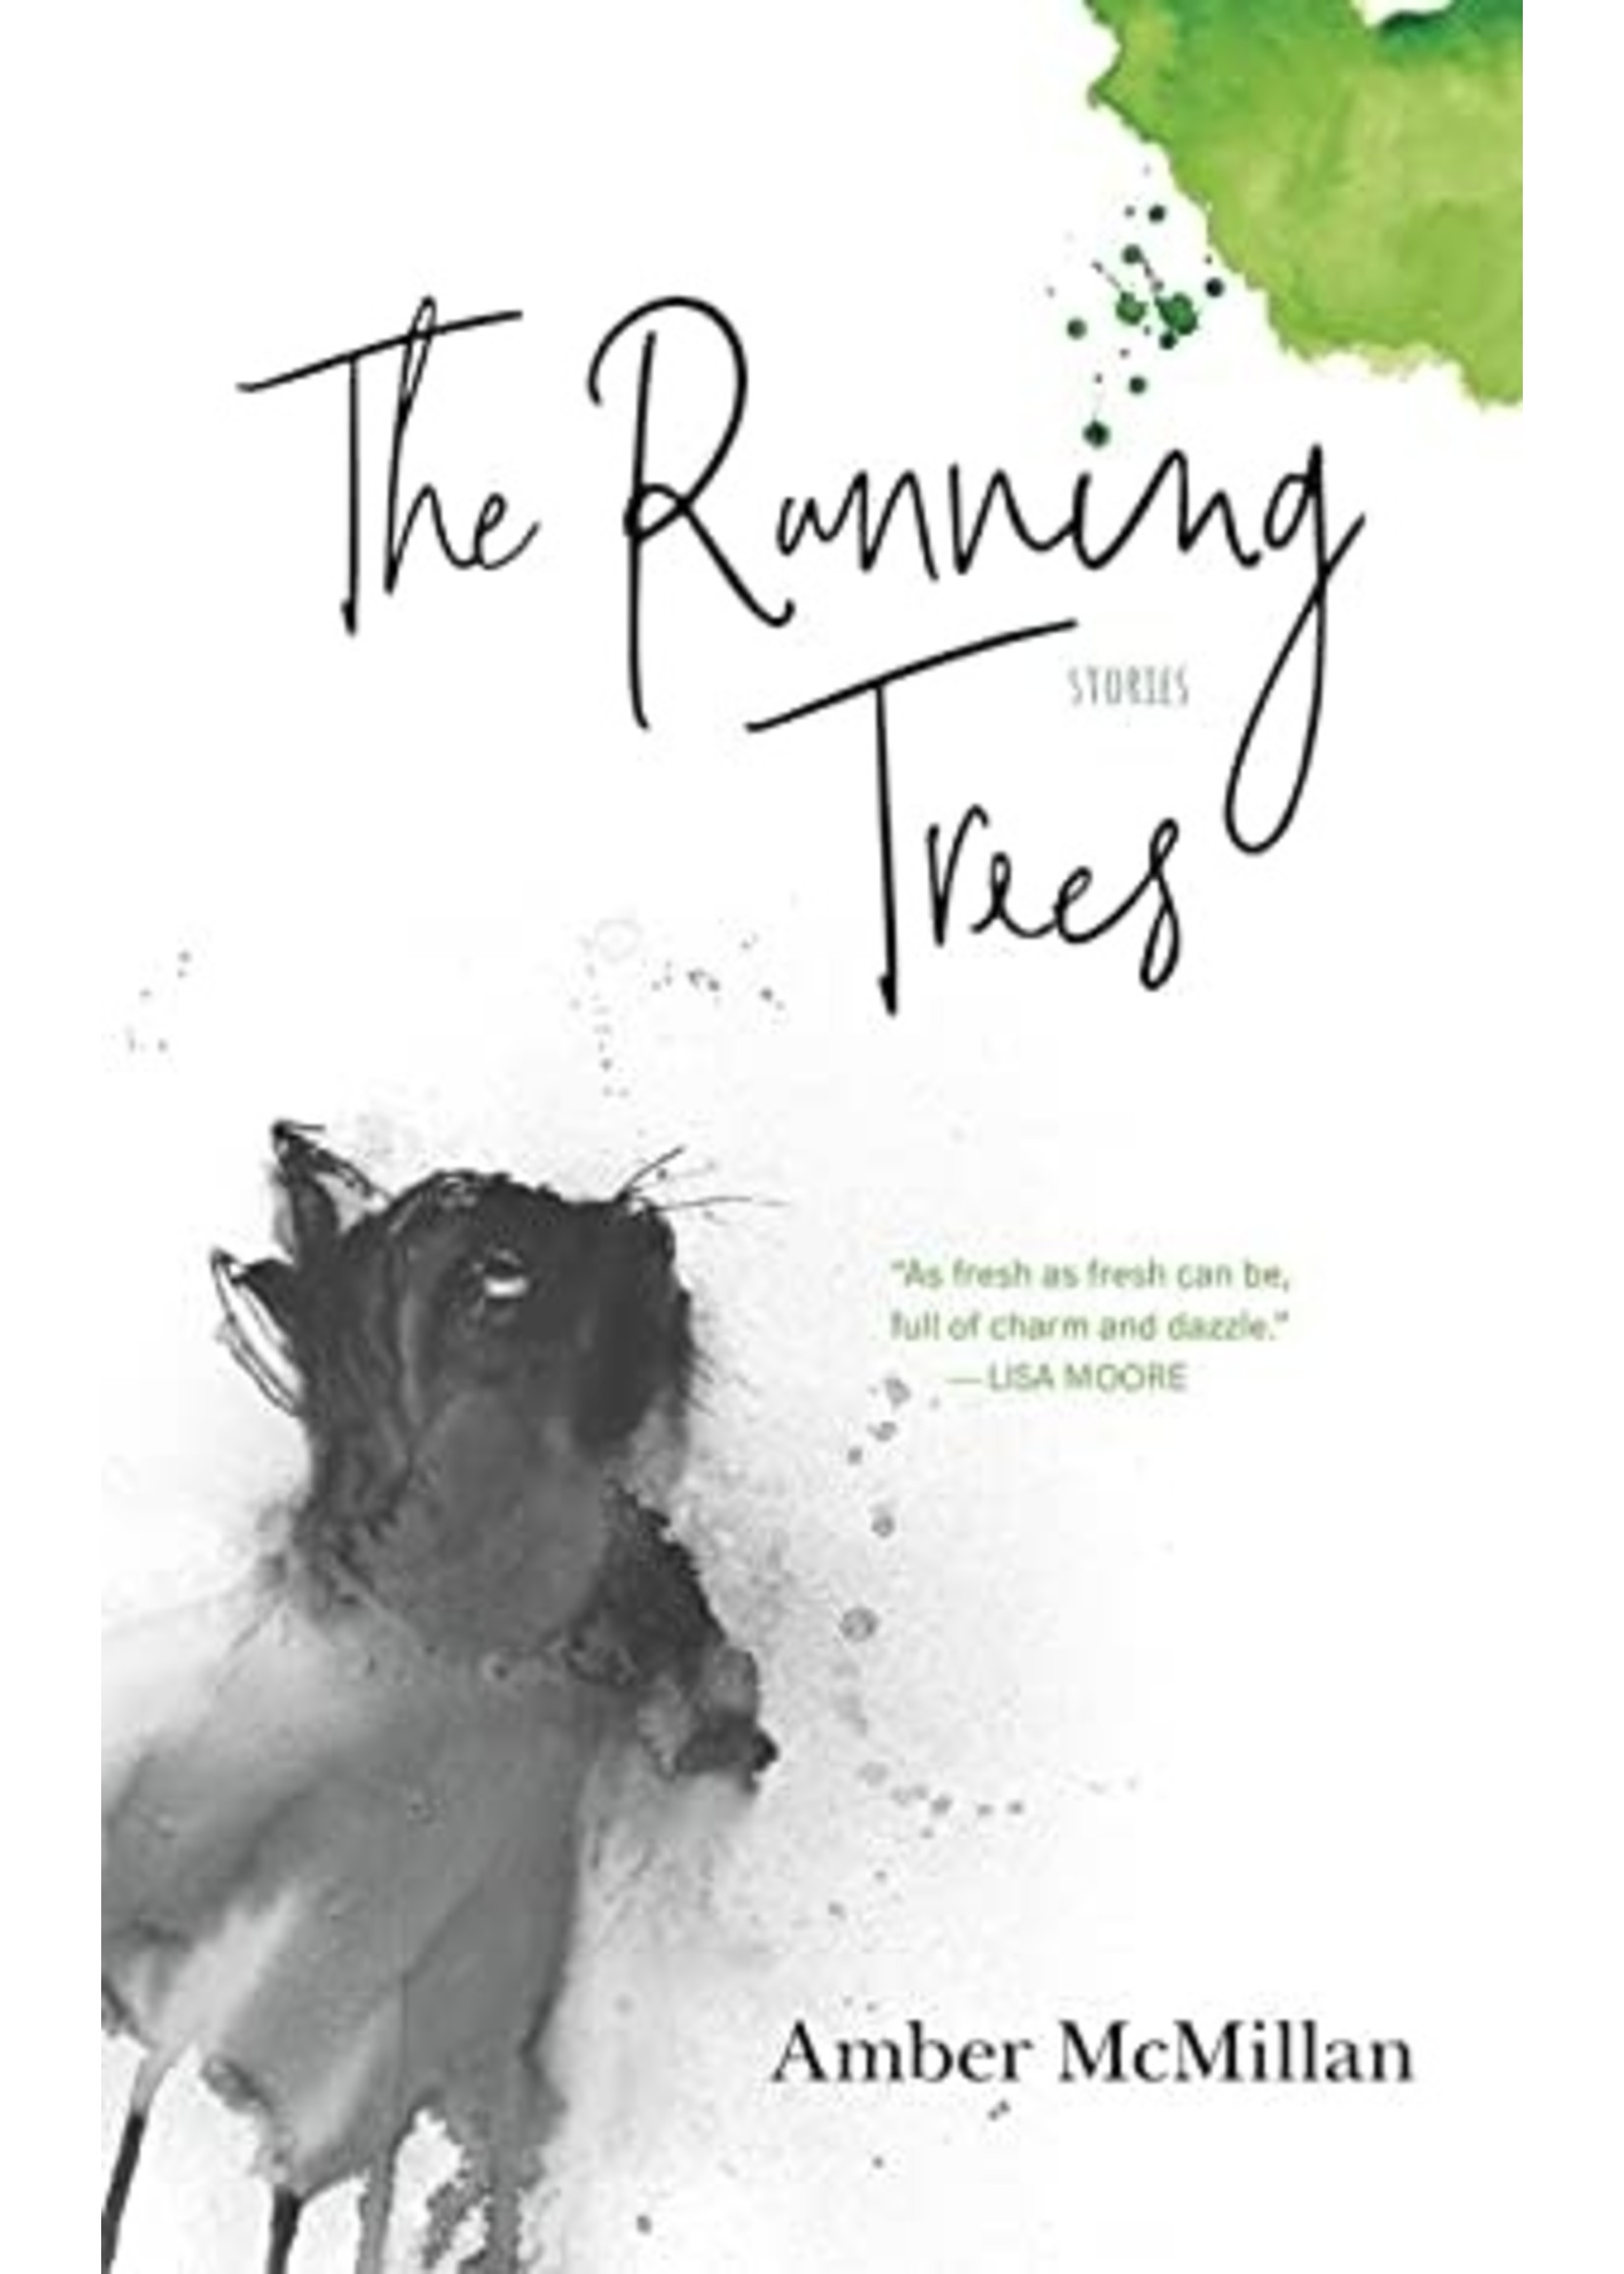 The Running Trees by Amber McMillan